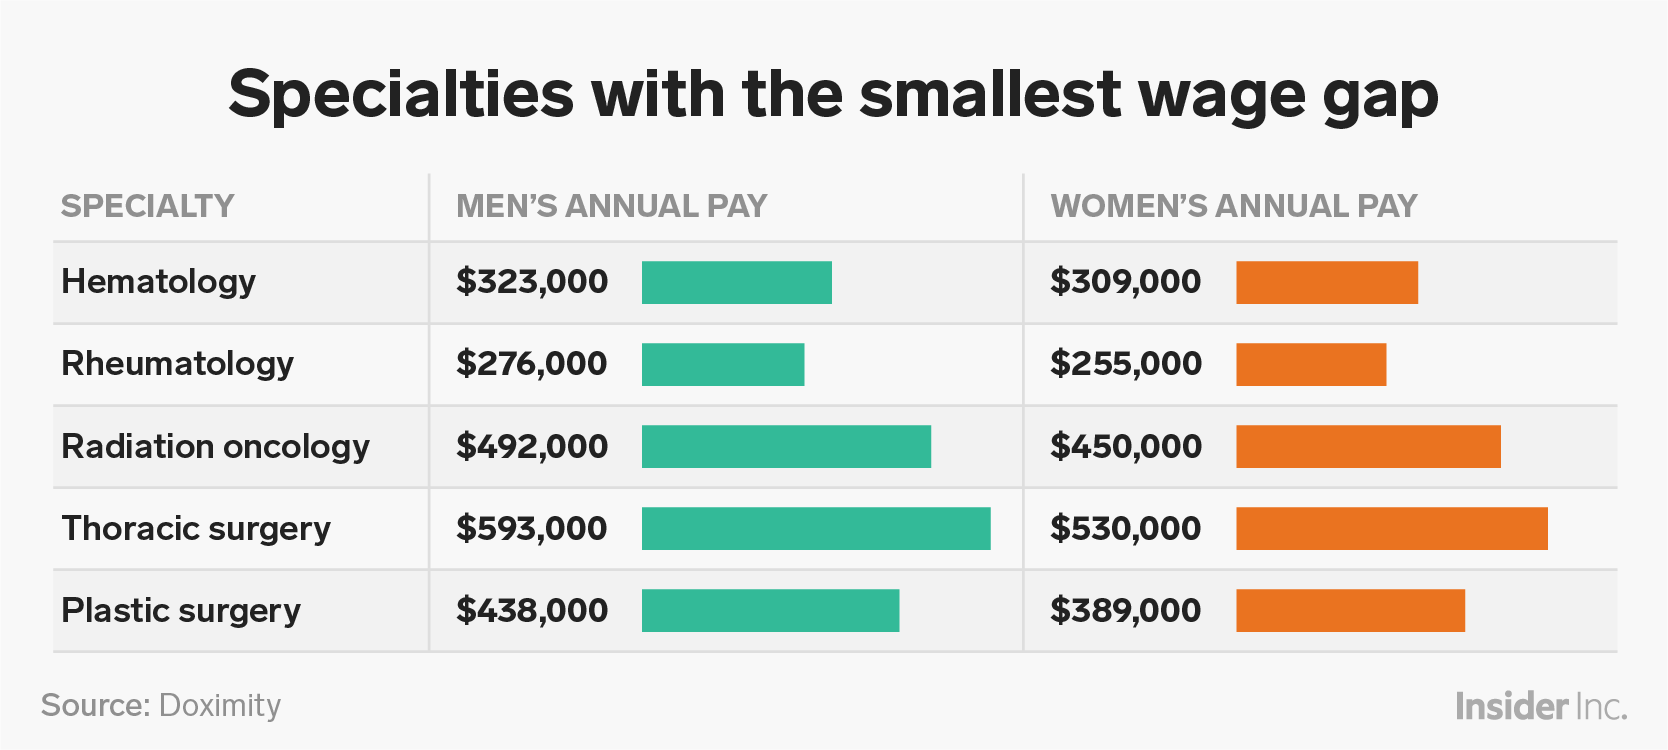 The gender pay gap is real, and persists in medicine, too. Some of the